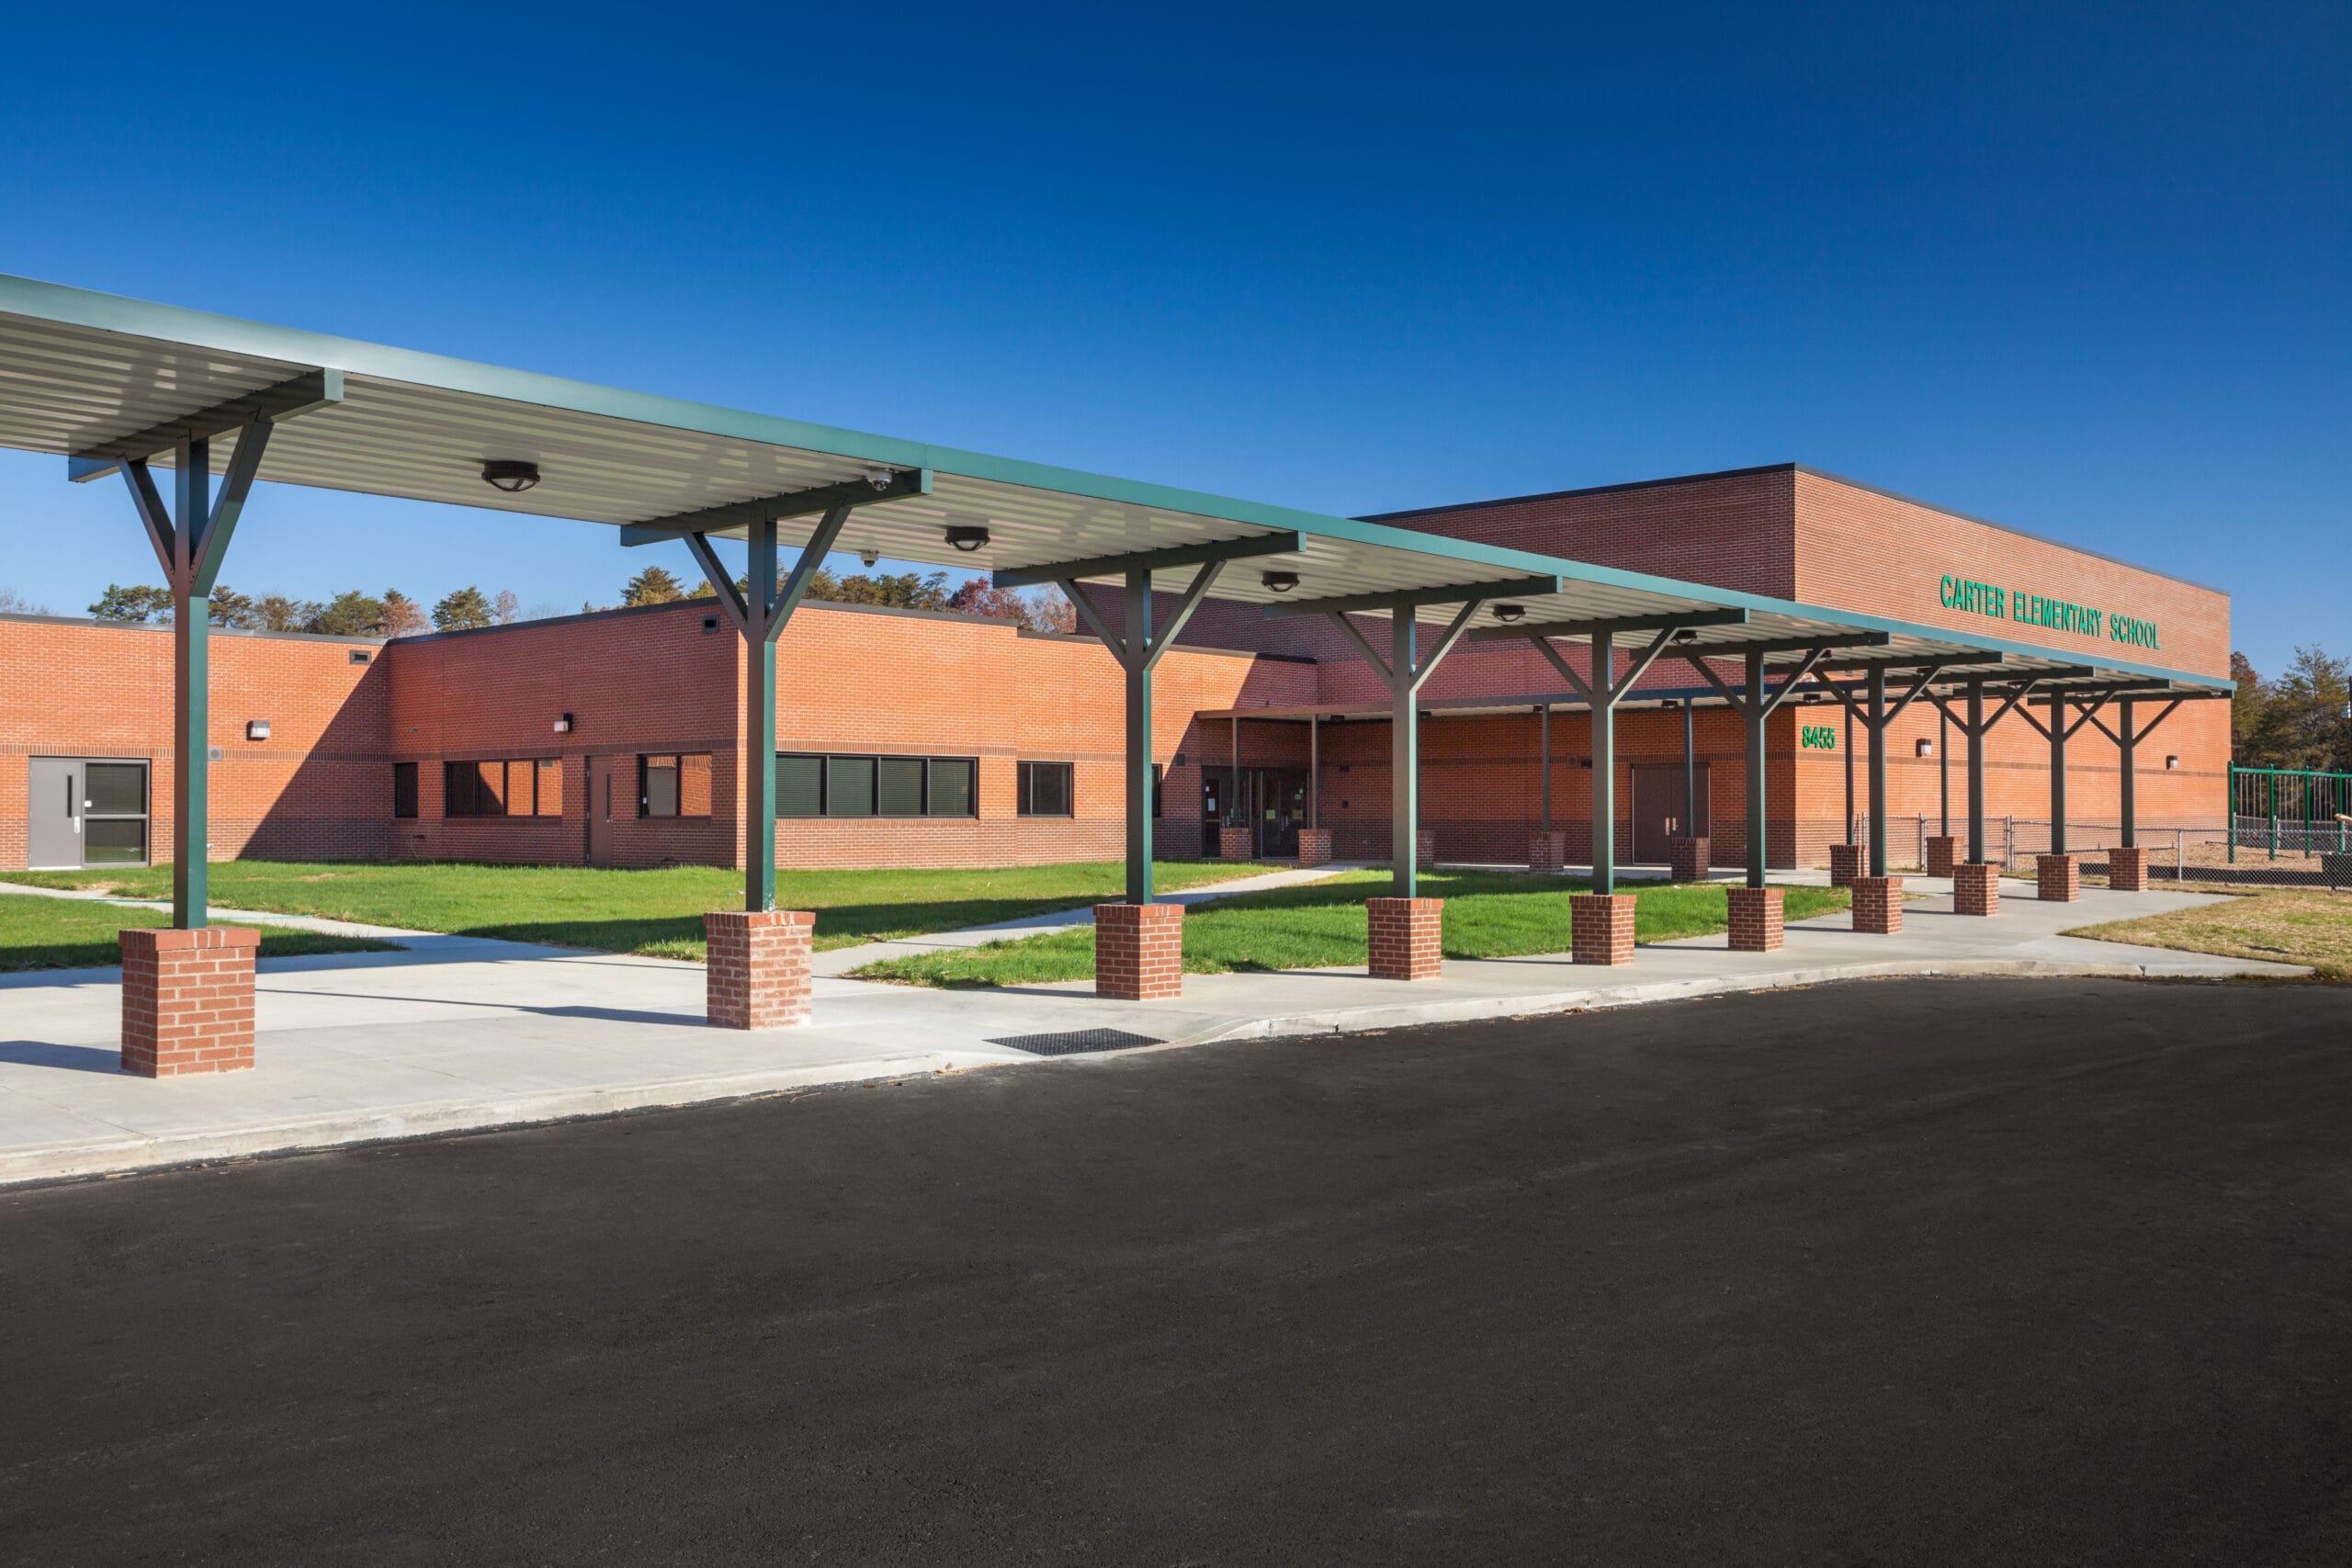 Featured image for “Carter Elementary School”